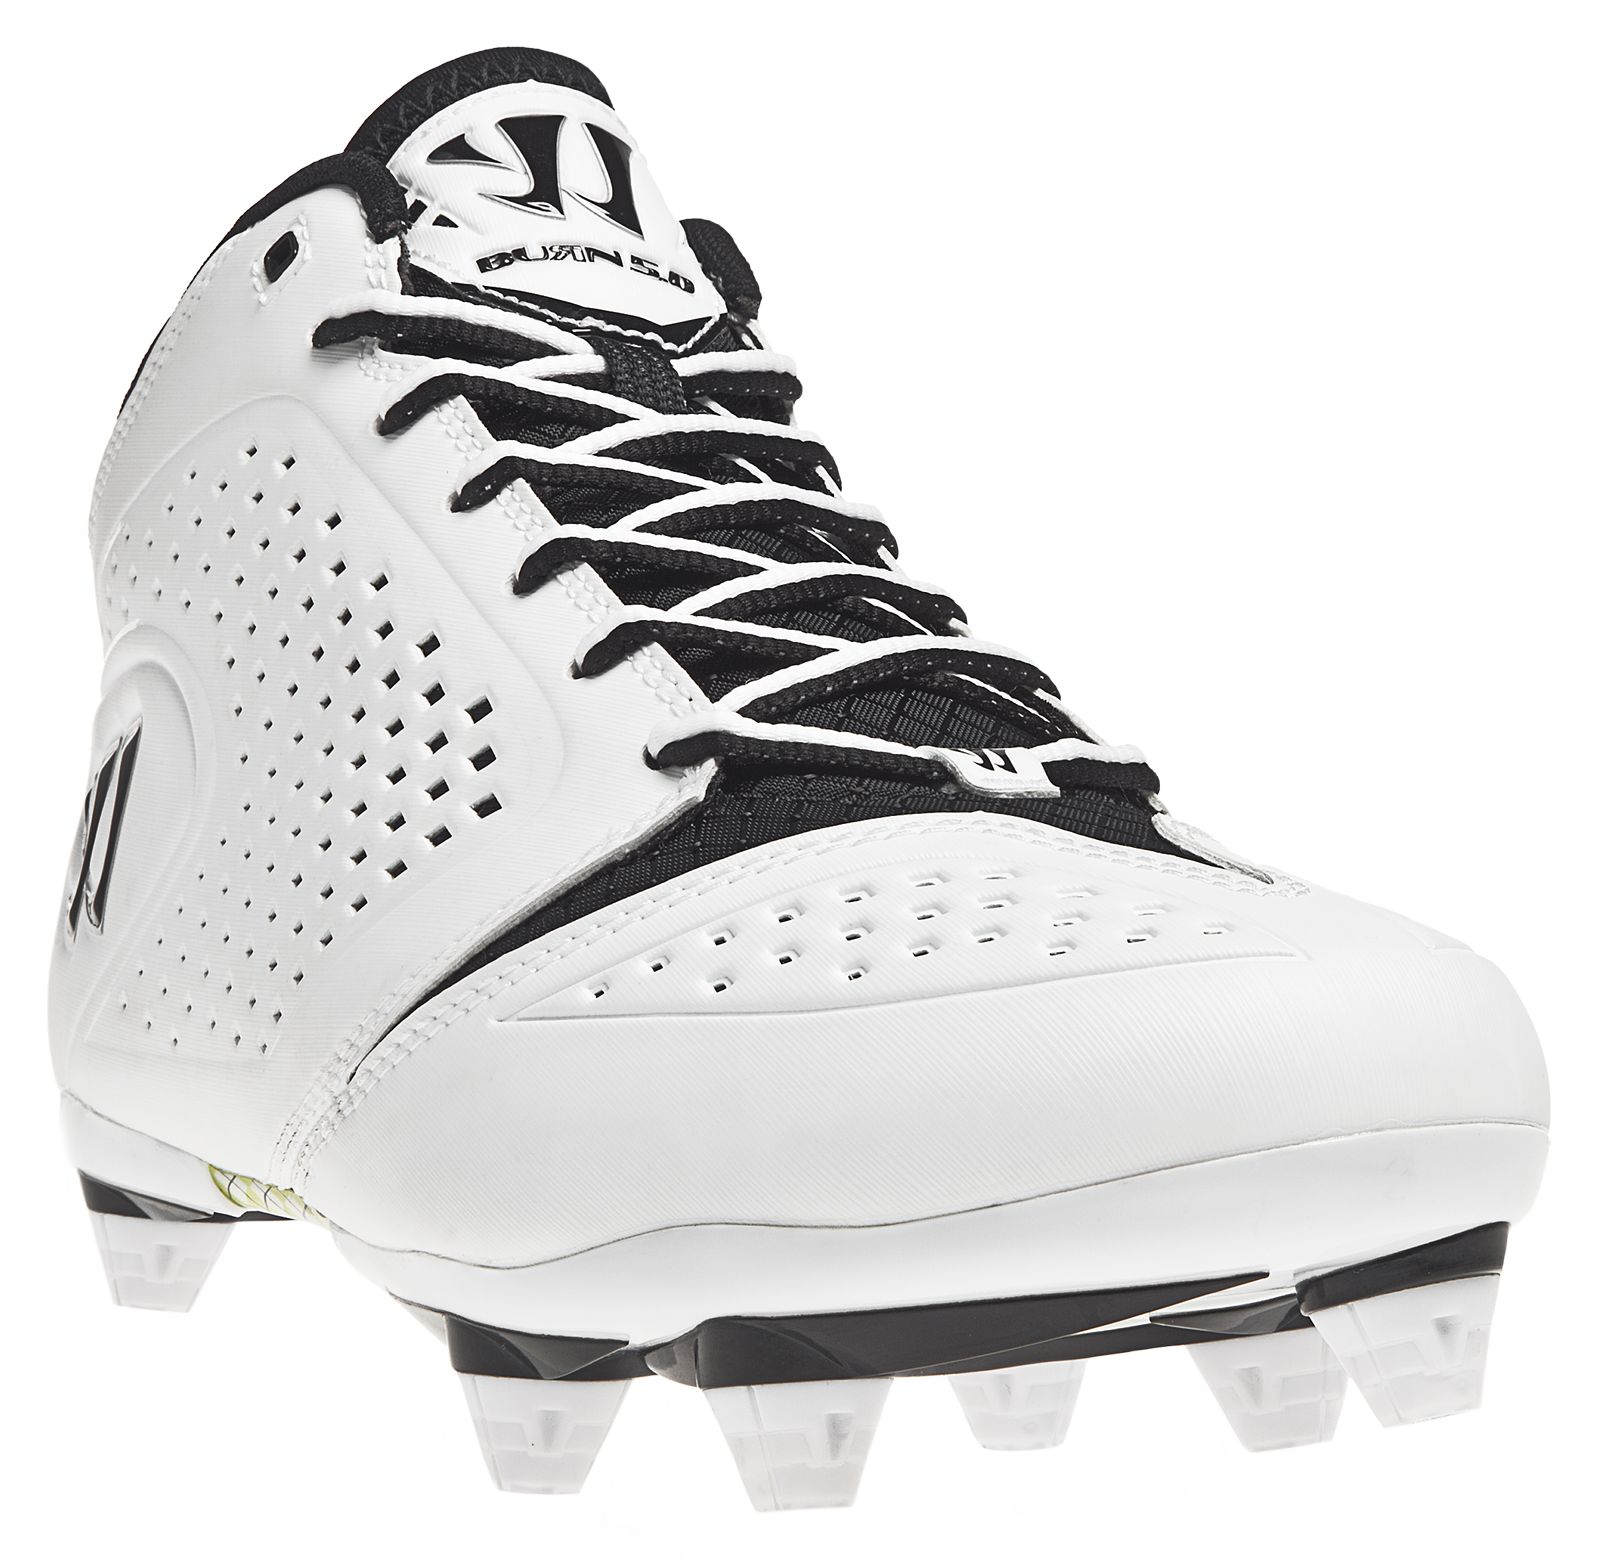 Burn Speed 5.0 Detach Cleat, White with Black image number 2